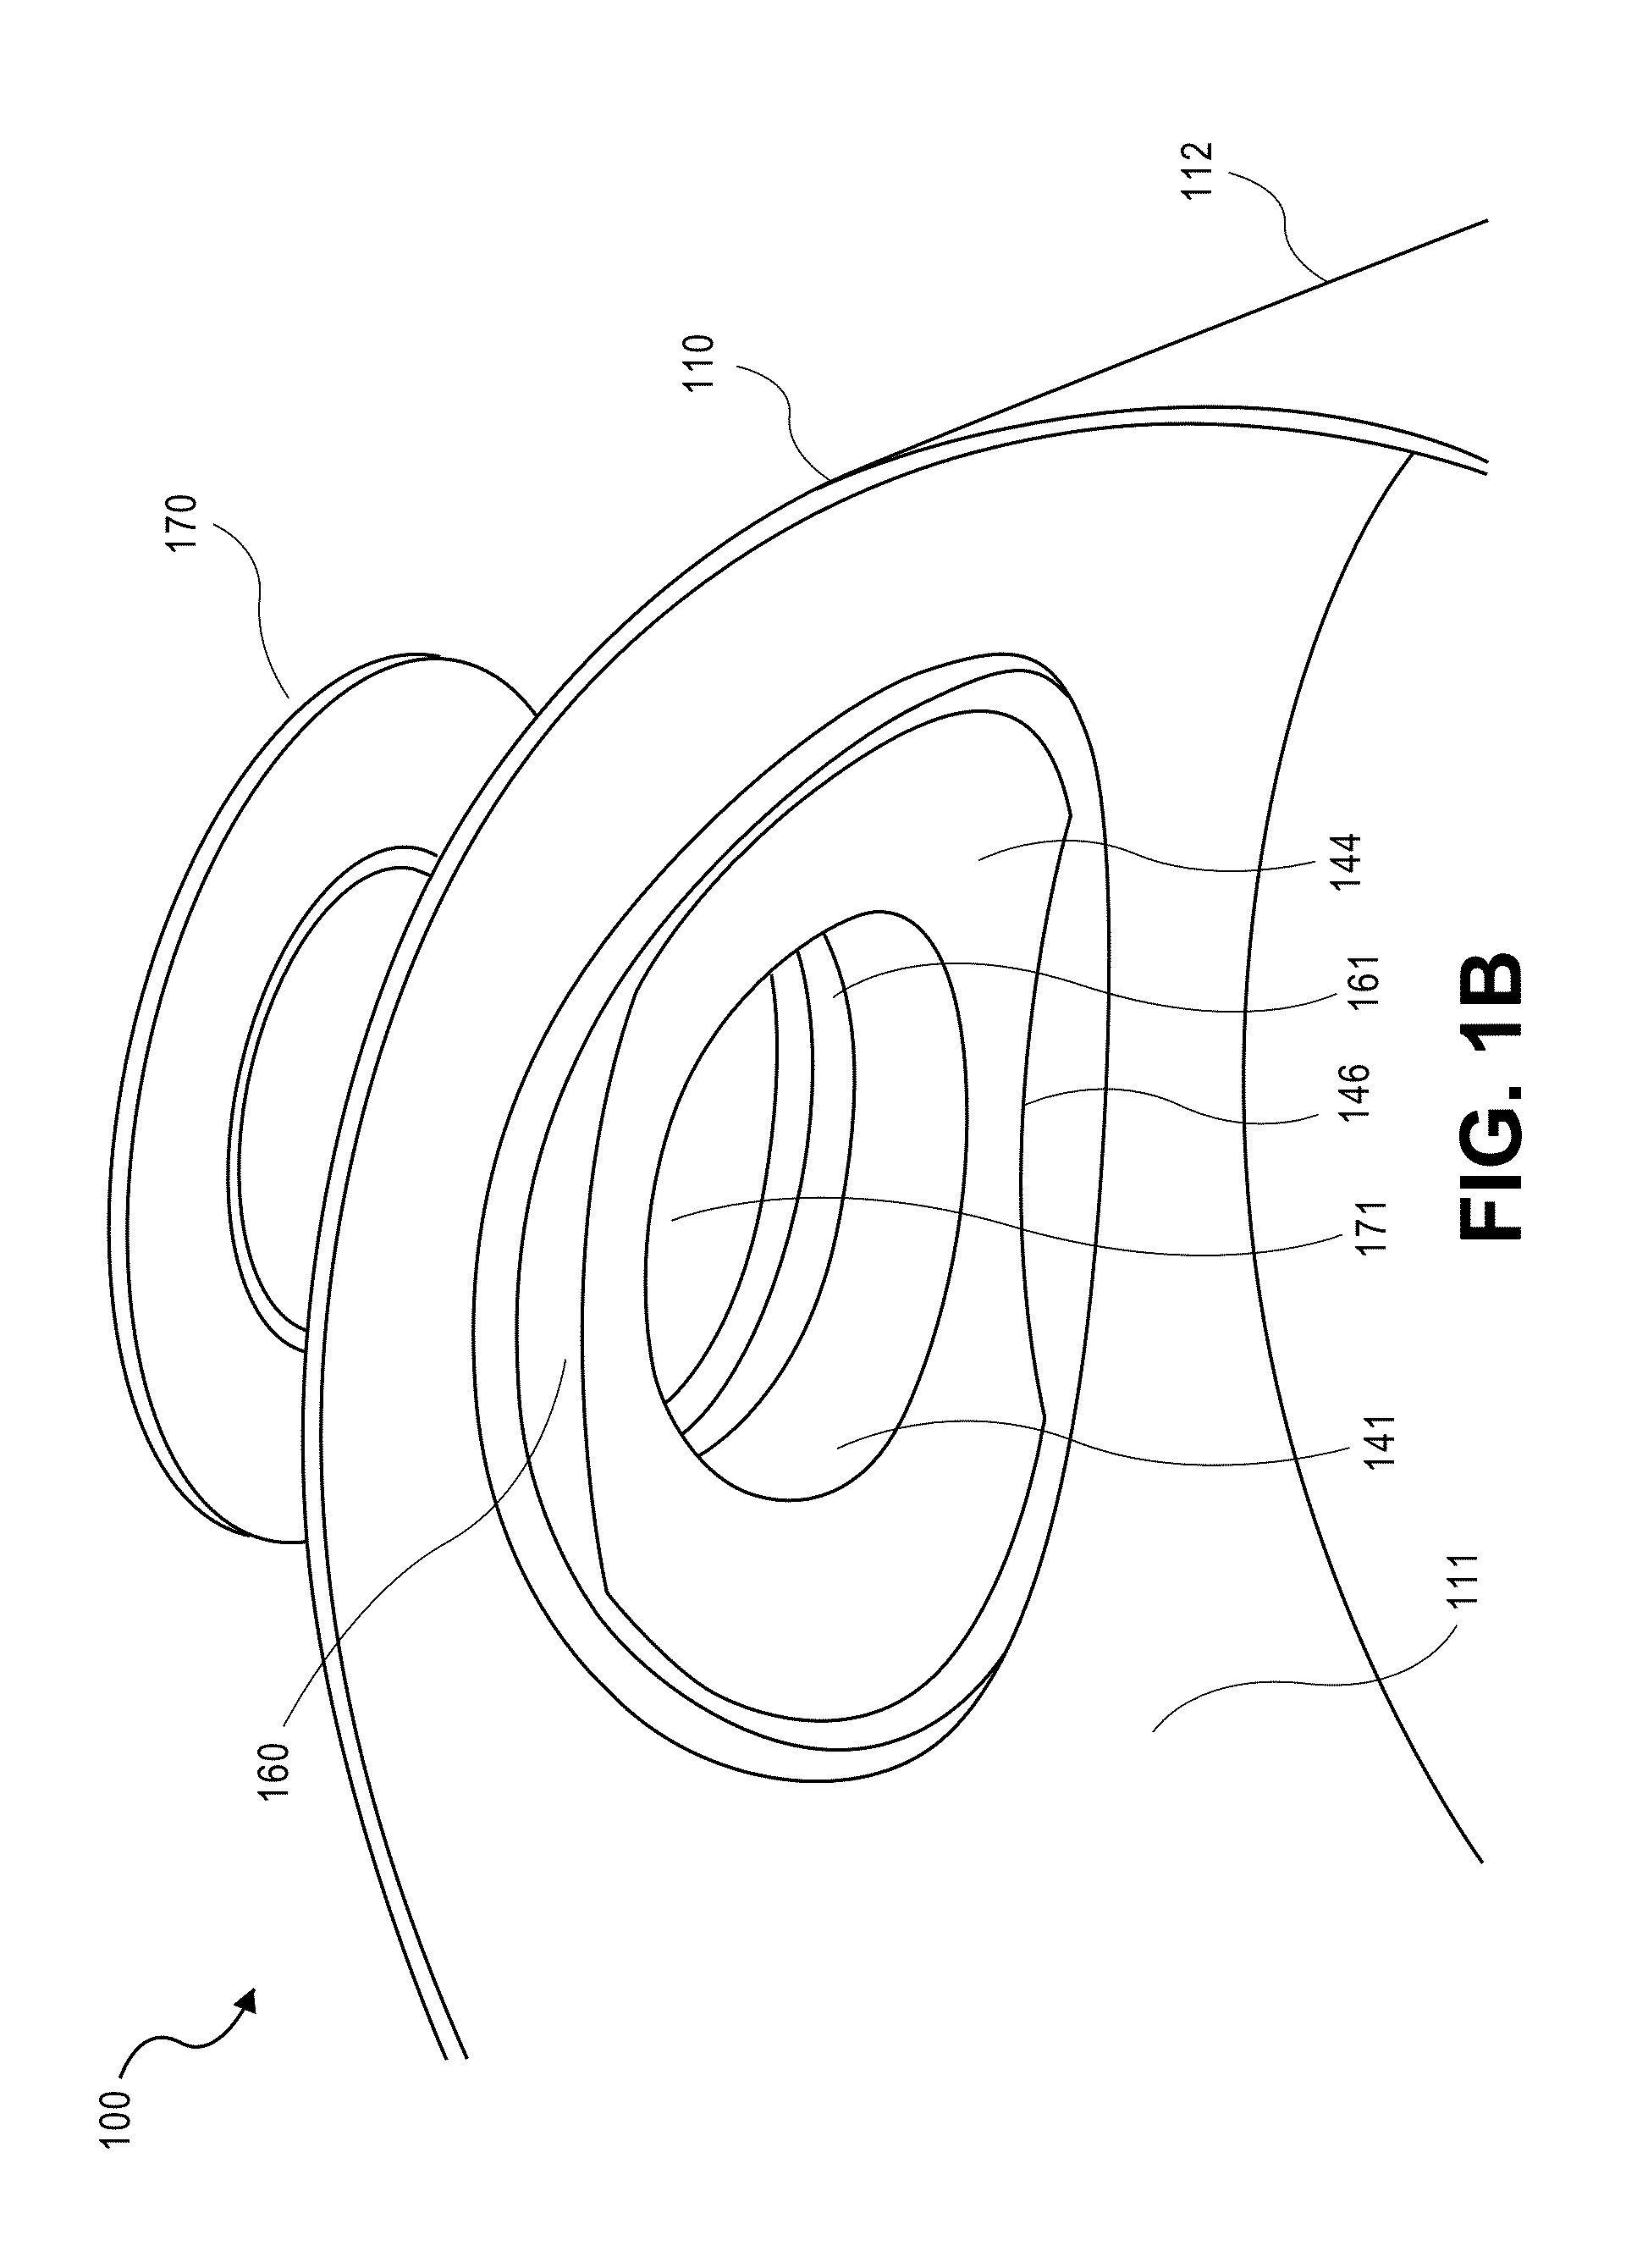 Saddle tap connection and installation device